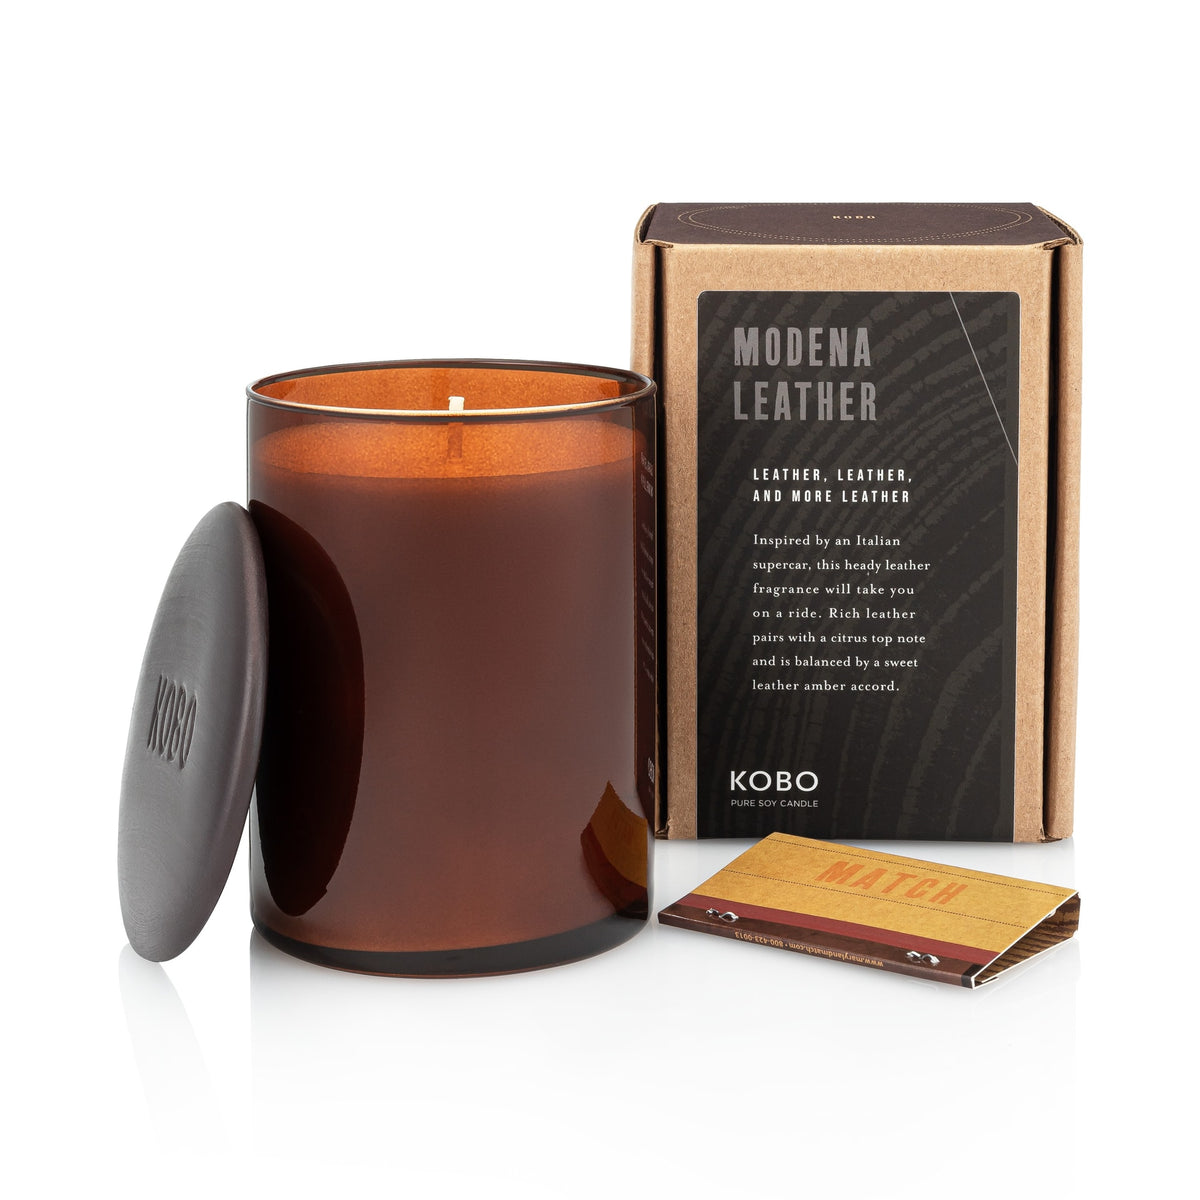 Primary Image of Modena Leather Woodblock Candle